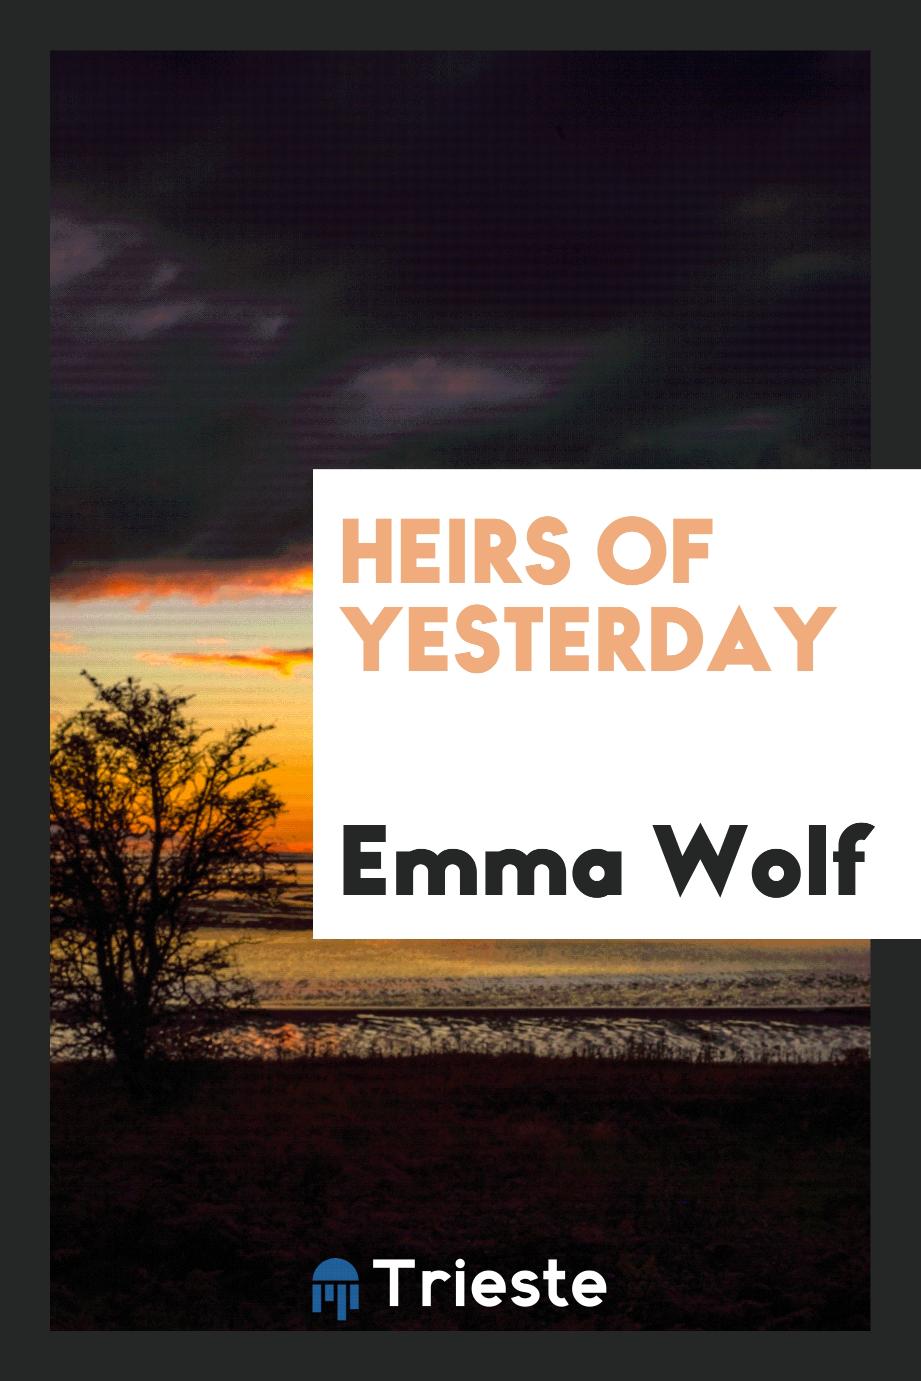 Heirs of yesterday